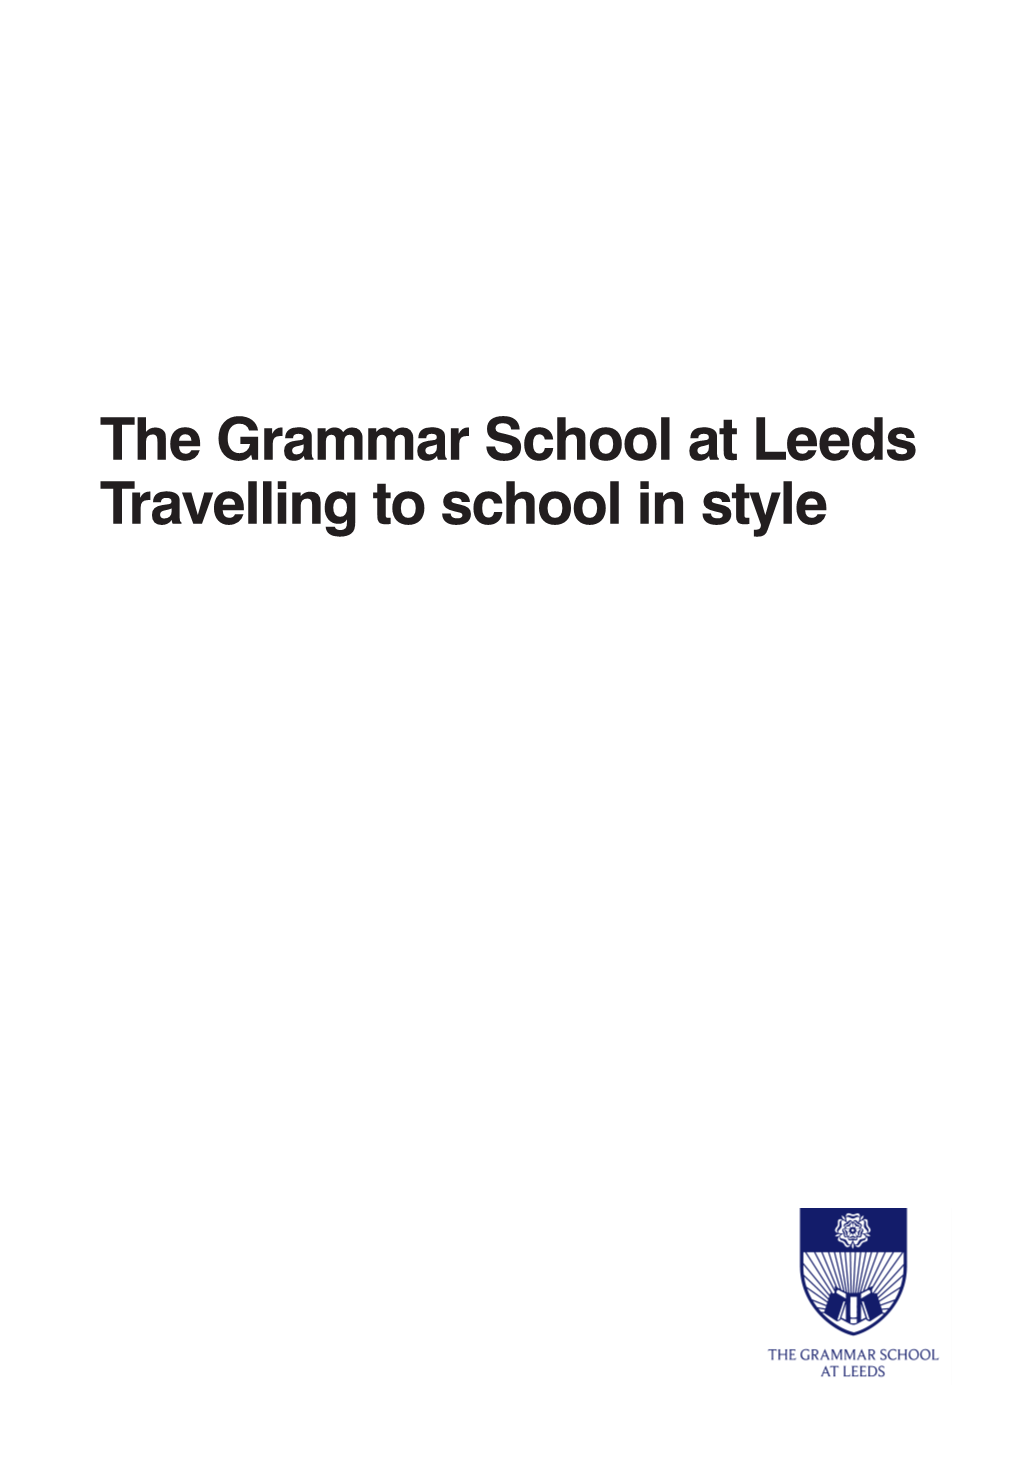 The Grammar School at Leeds Travelling to School in Style